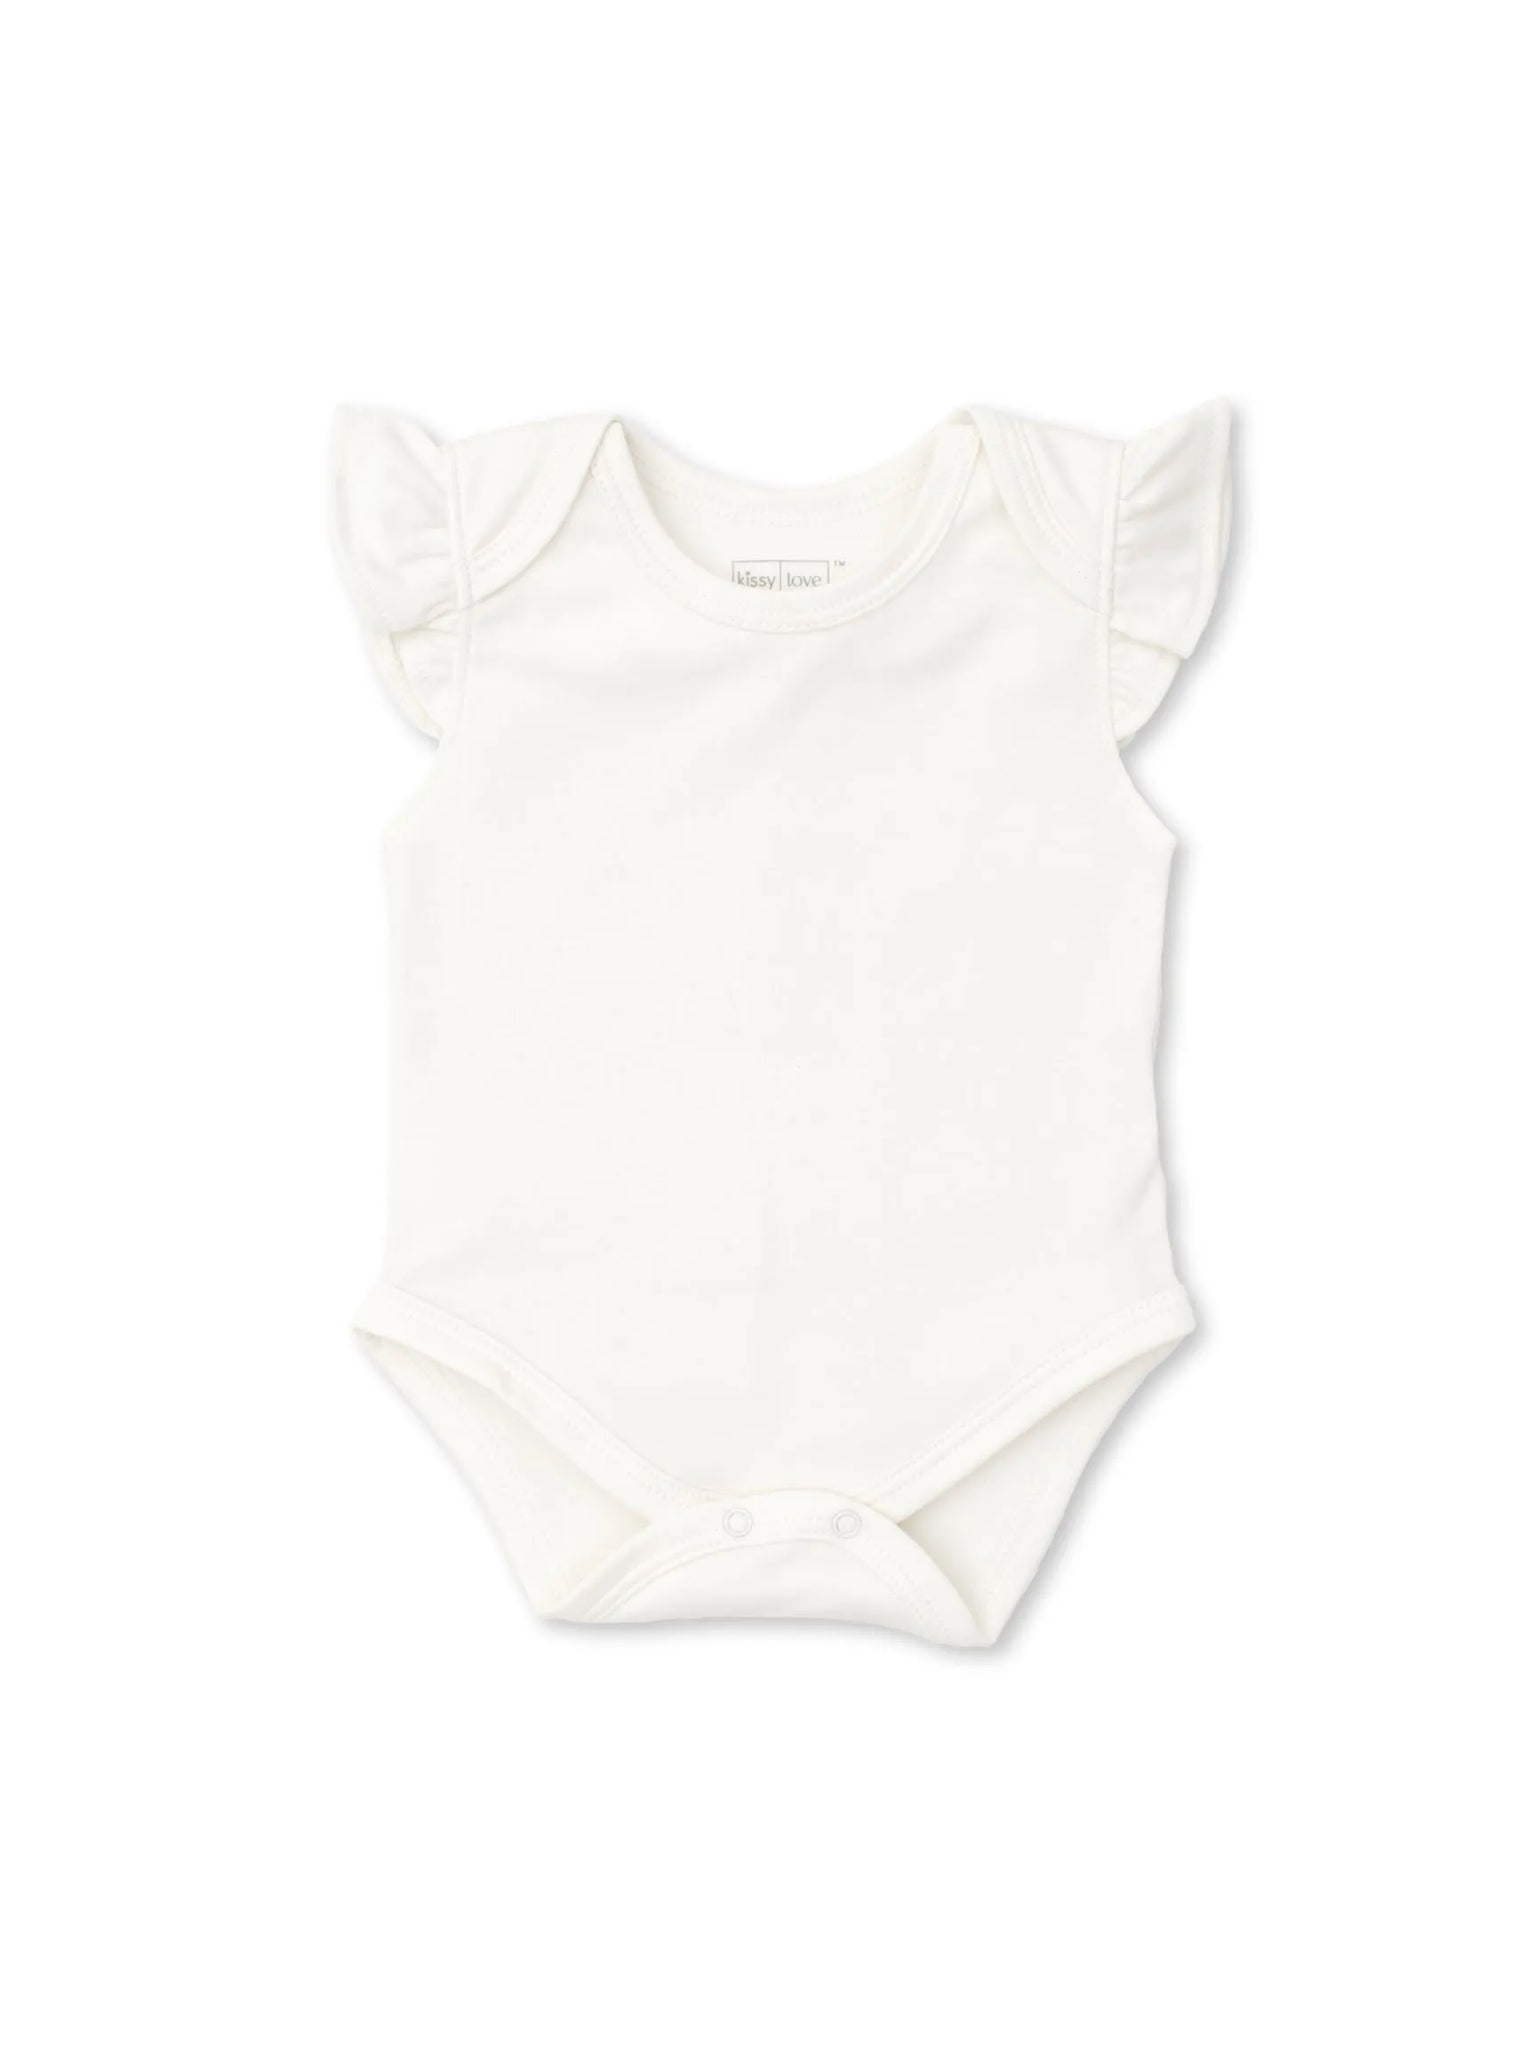 cream solid onesie with ruffle sleeves